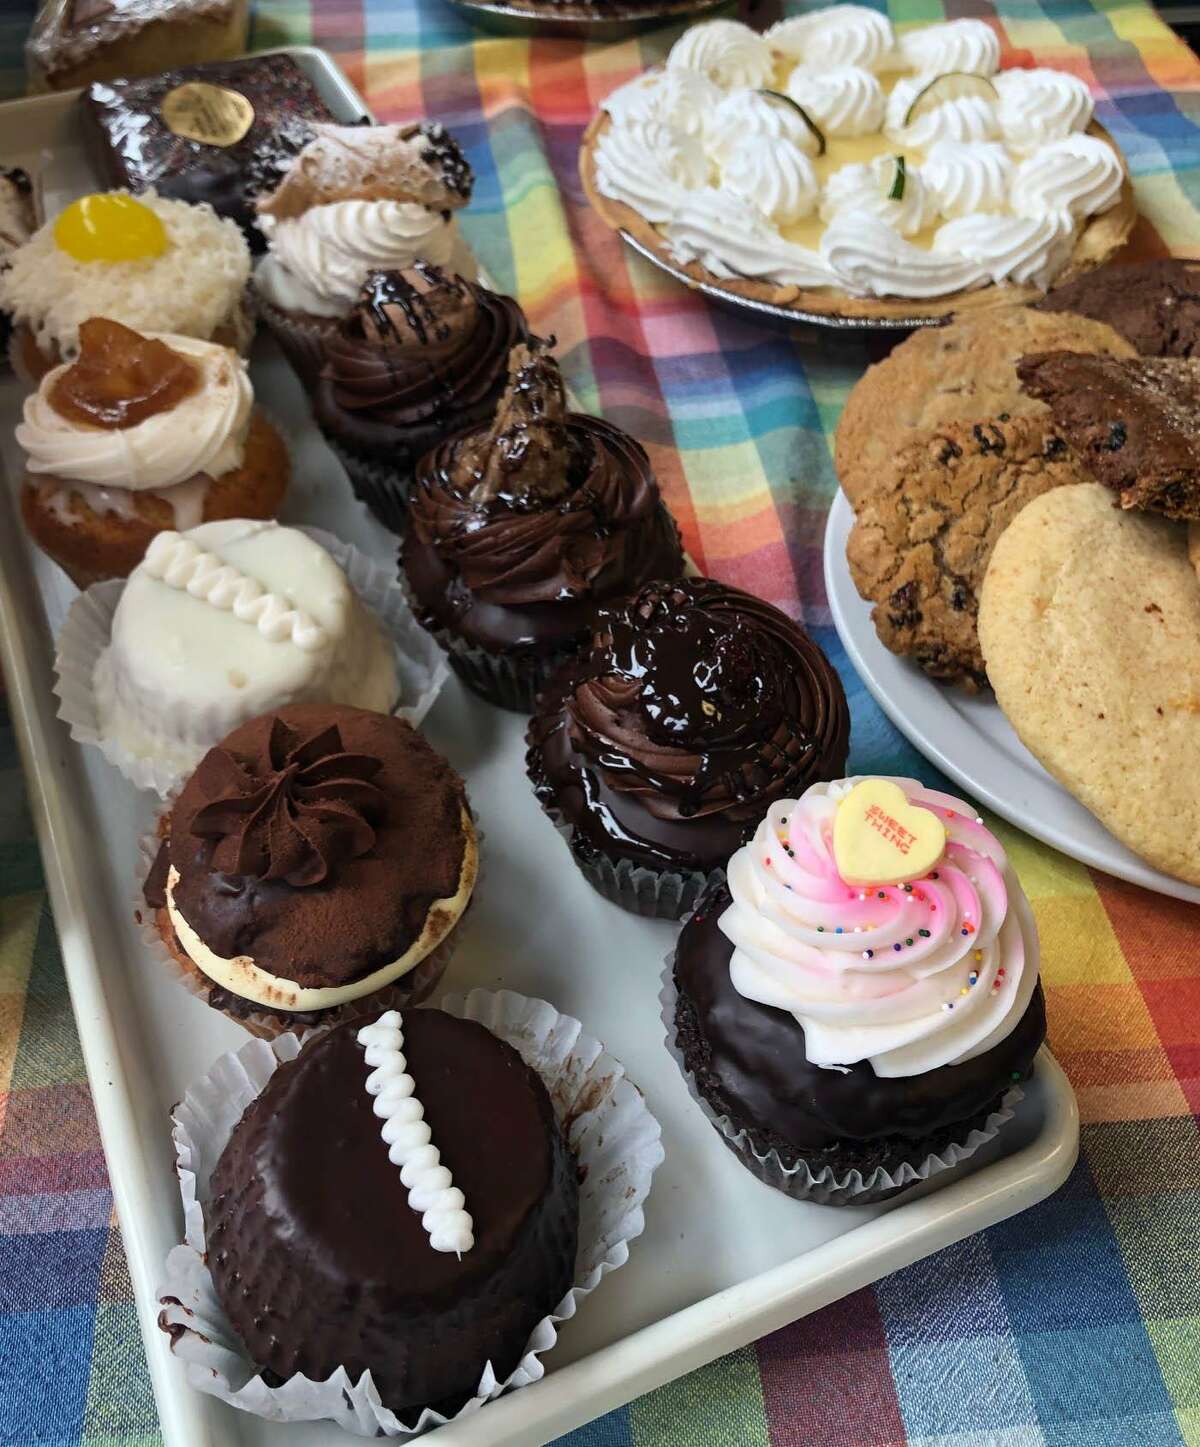 Spectrum/American Pie Company in Sherman, which celebrated its 25th anniversary in Sherman, is well known for its homestyle cooking and delicious baked goods. An assortment of cupcakes, pies, cookies, brownies and other treats are sold. February 2019